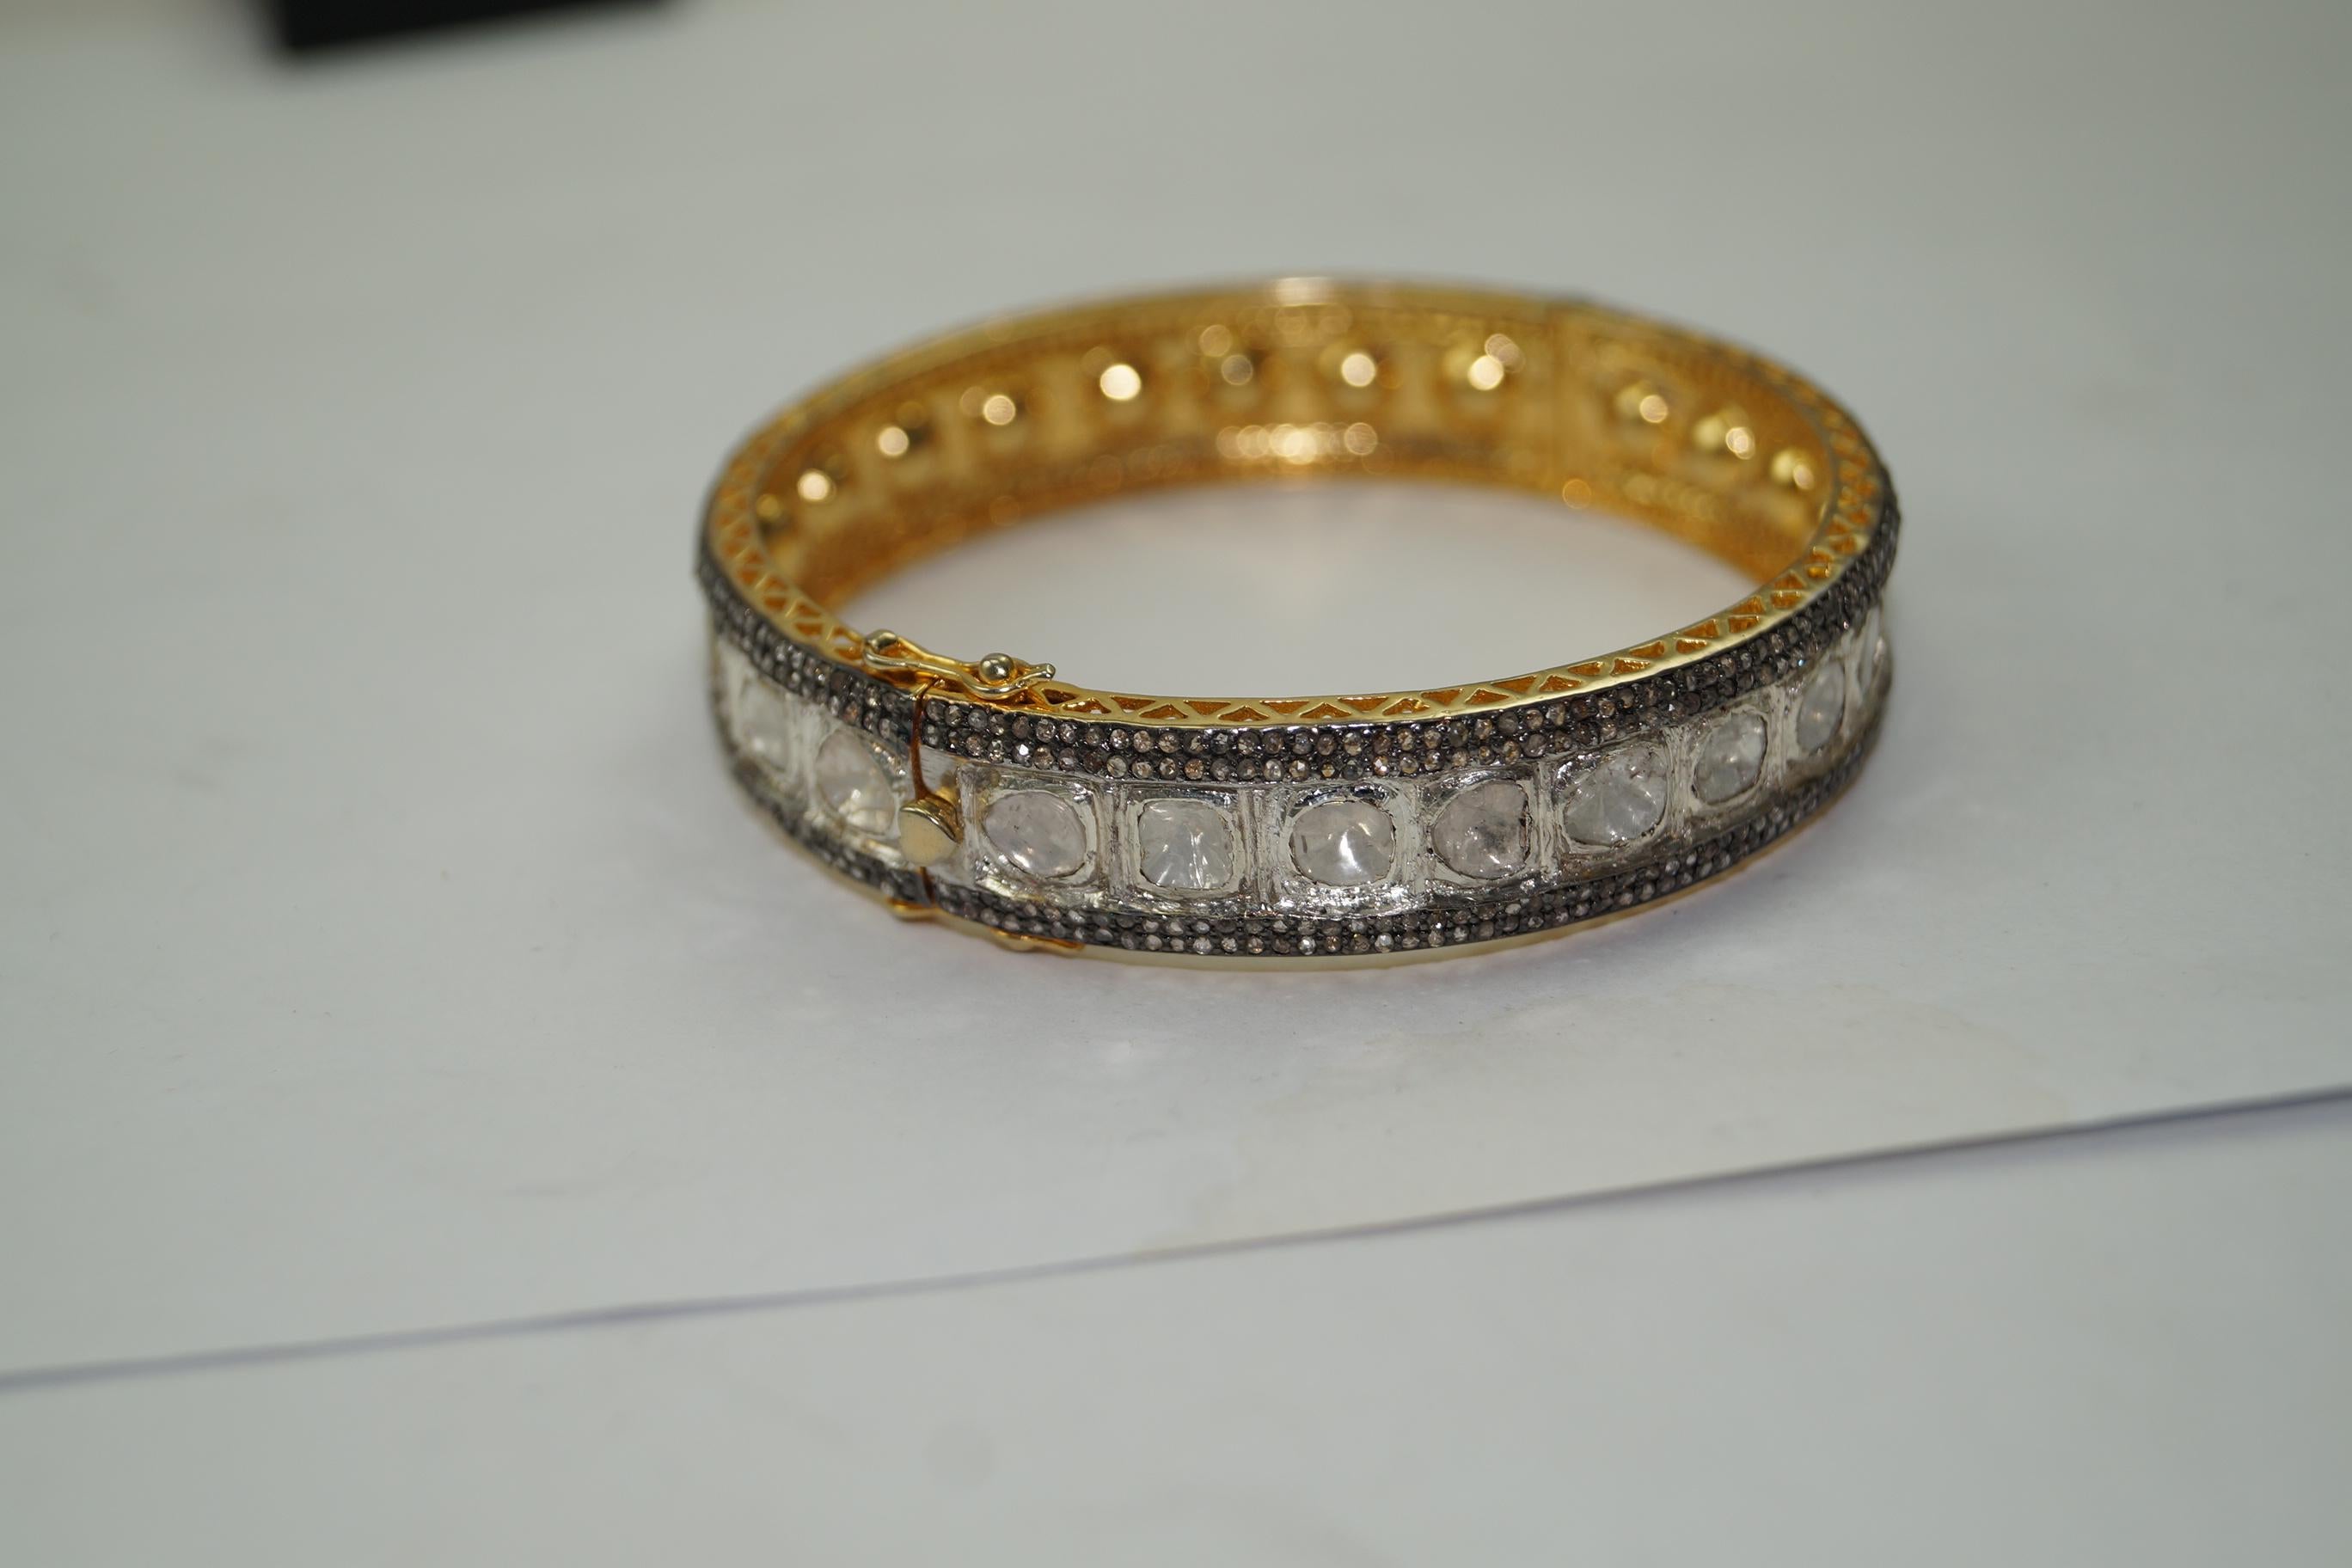 This vintage style diamond silver and yellow gold plating hinged bangle consists of:

Diamond- 7.30cts
Diamond type: Rose cut diamonds and uncut polki diamond
Diamond color:  white and tinted yellow
Diamond origin- Natural
Metal: Silver
Metal